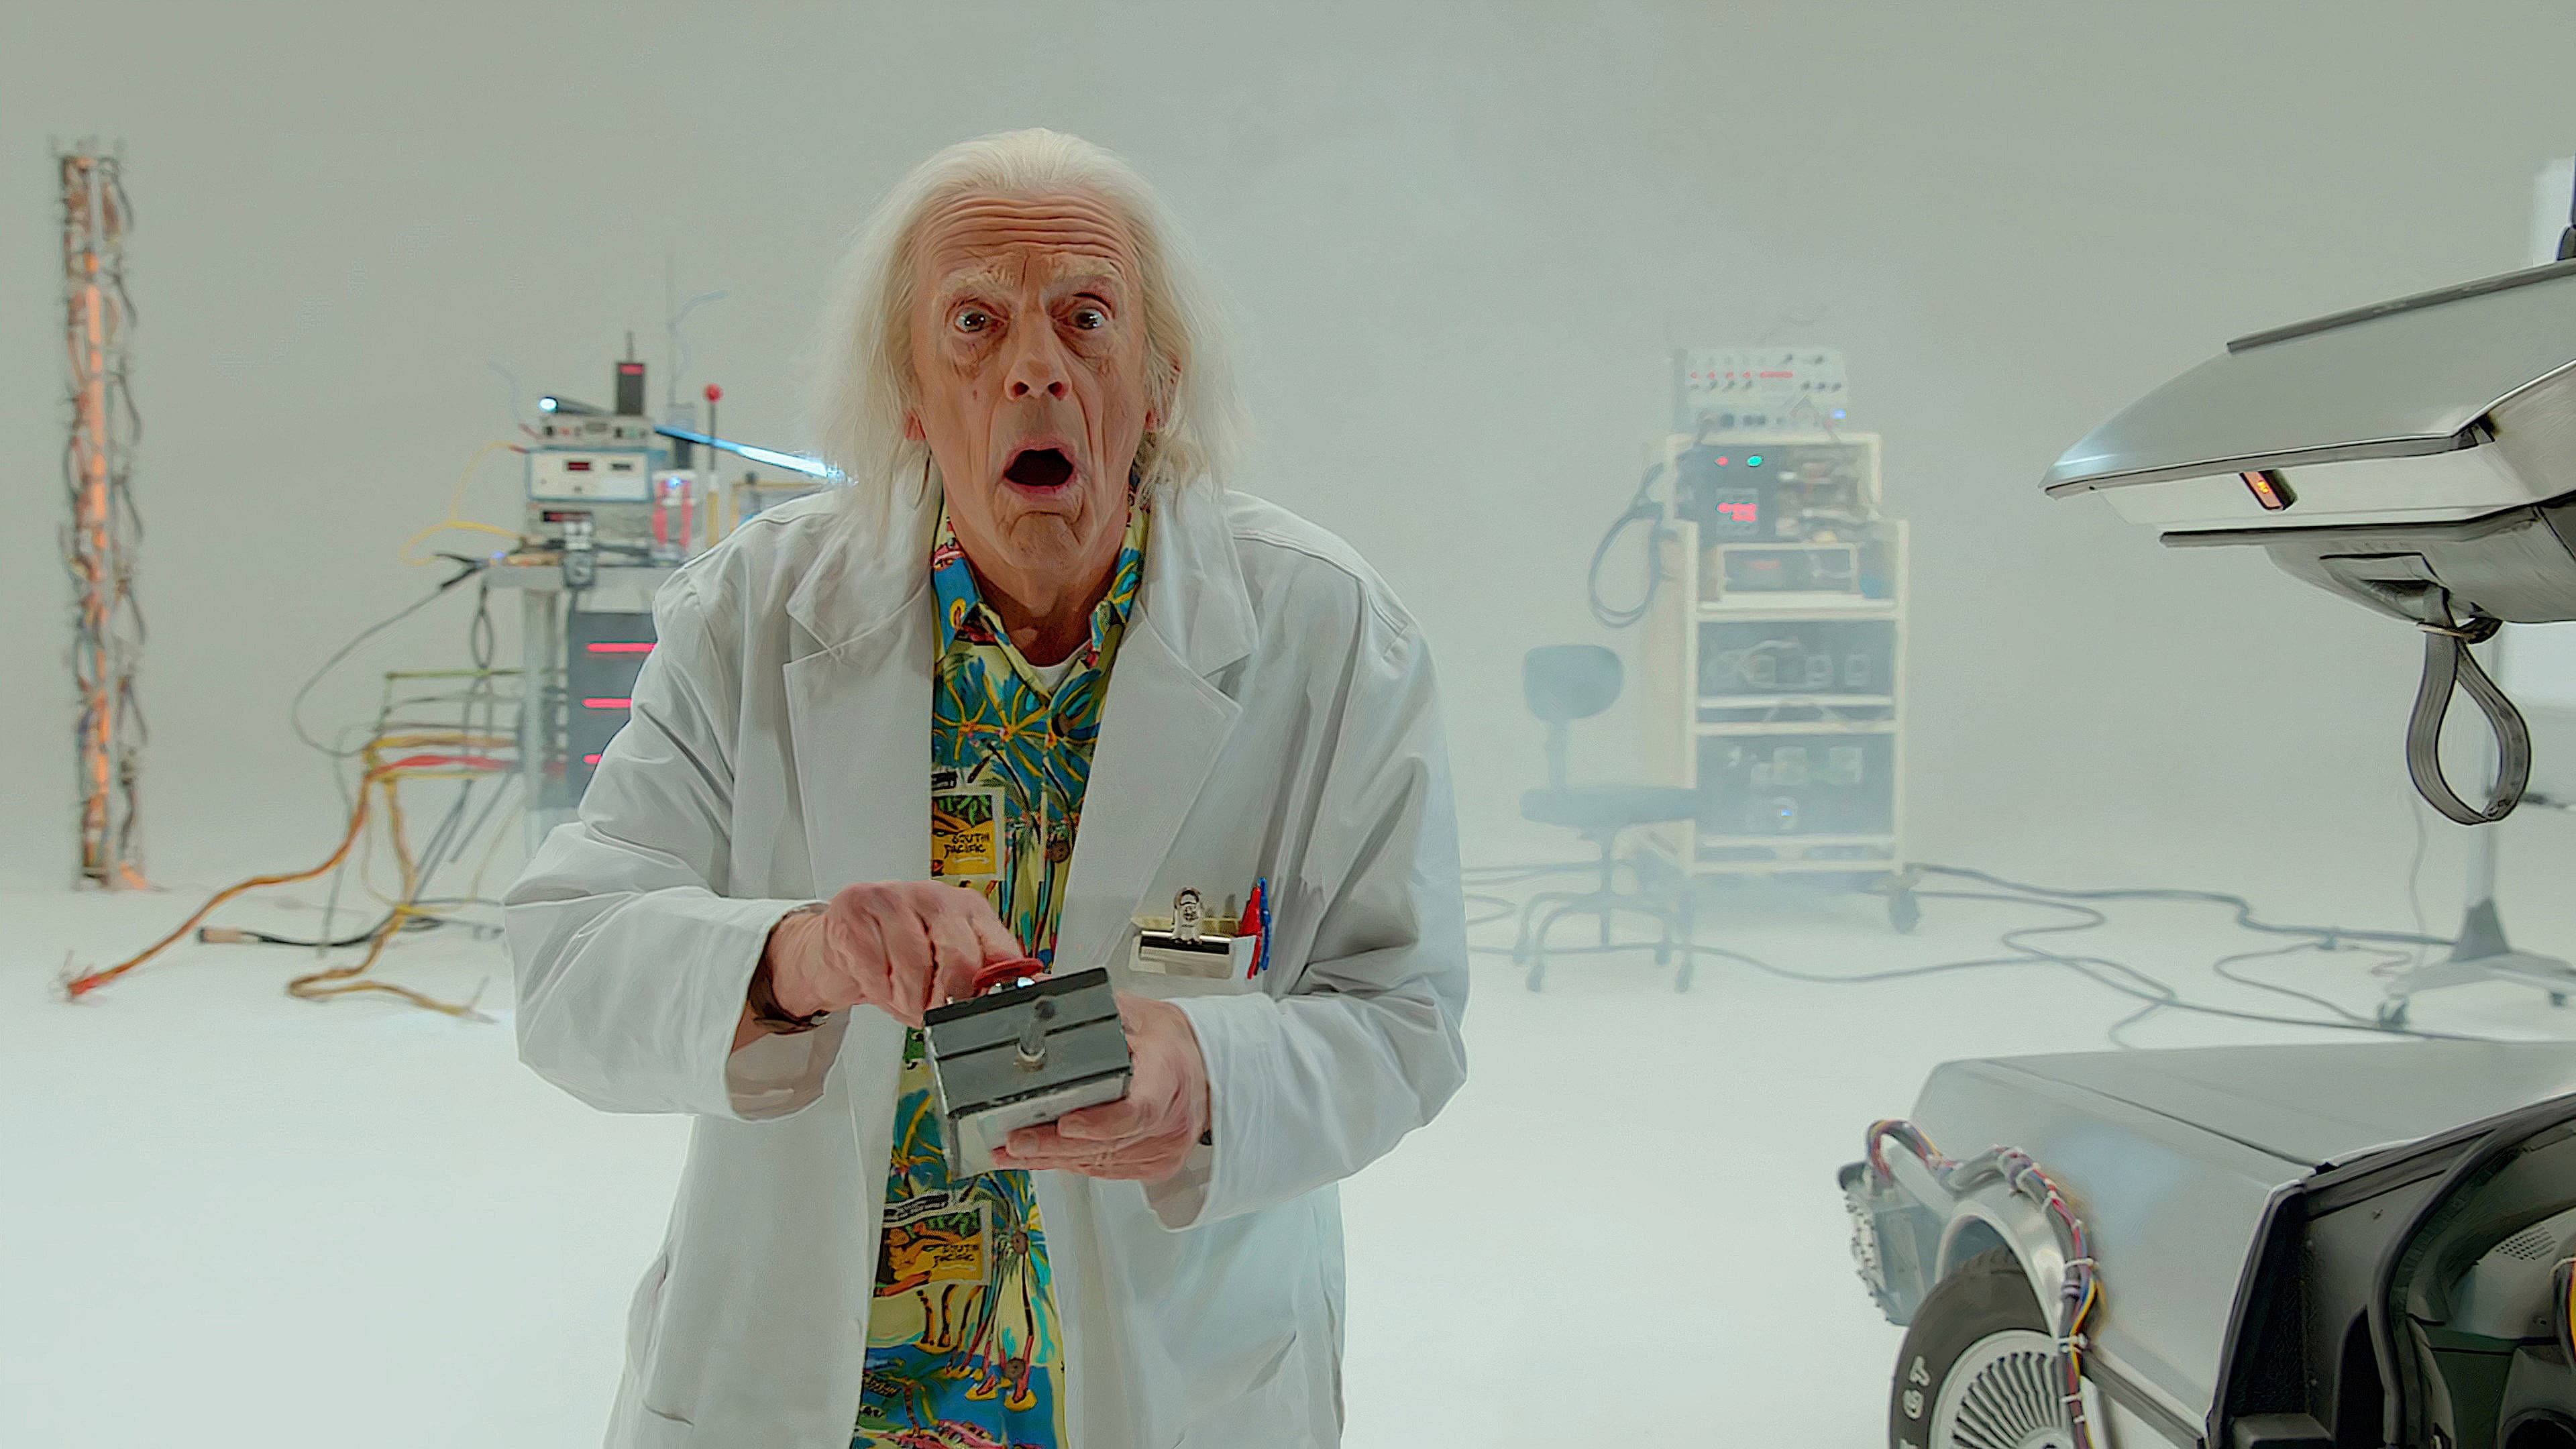 Doc Brown Saves the World (2015)